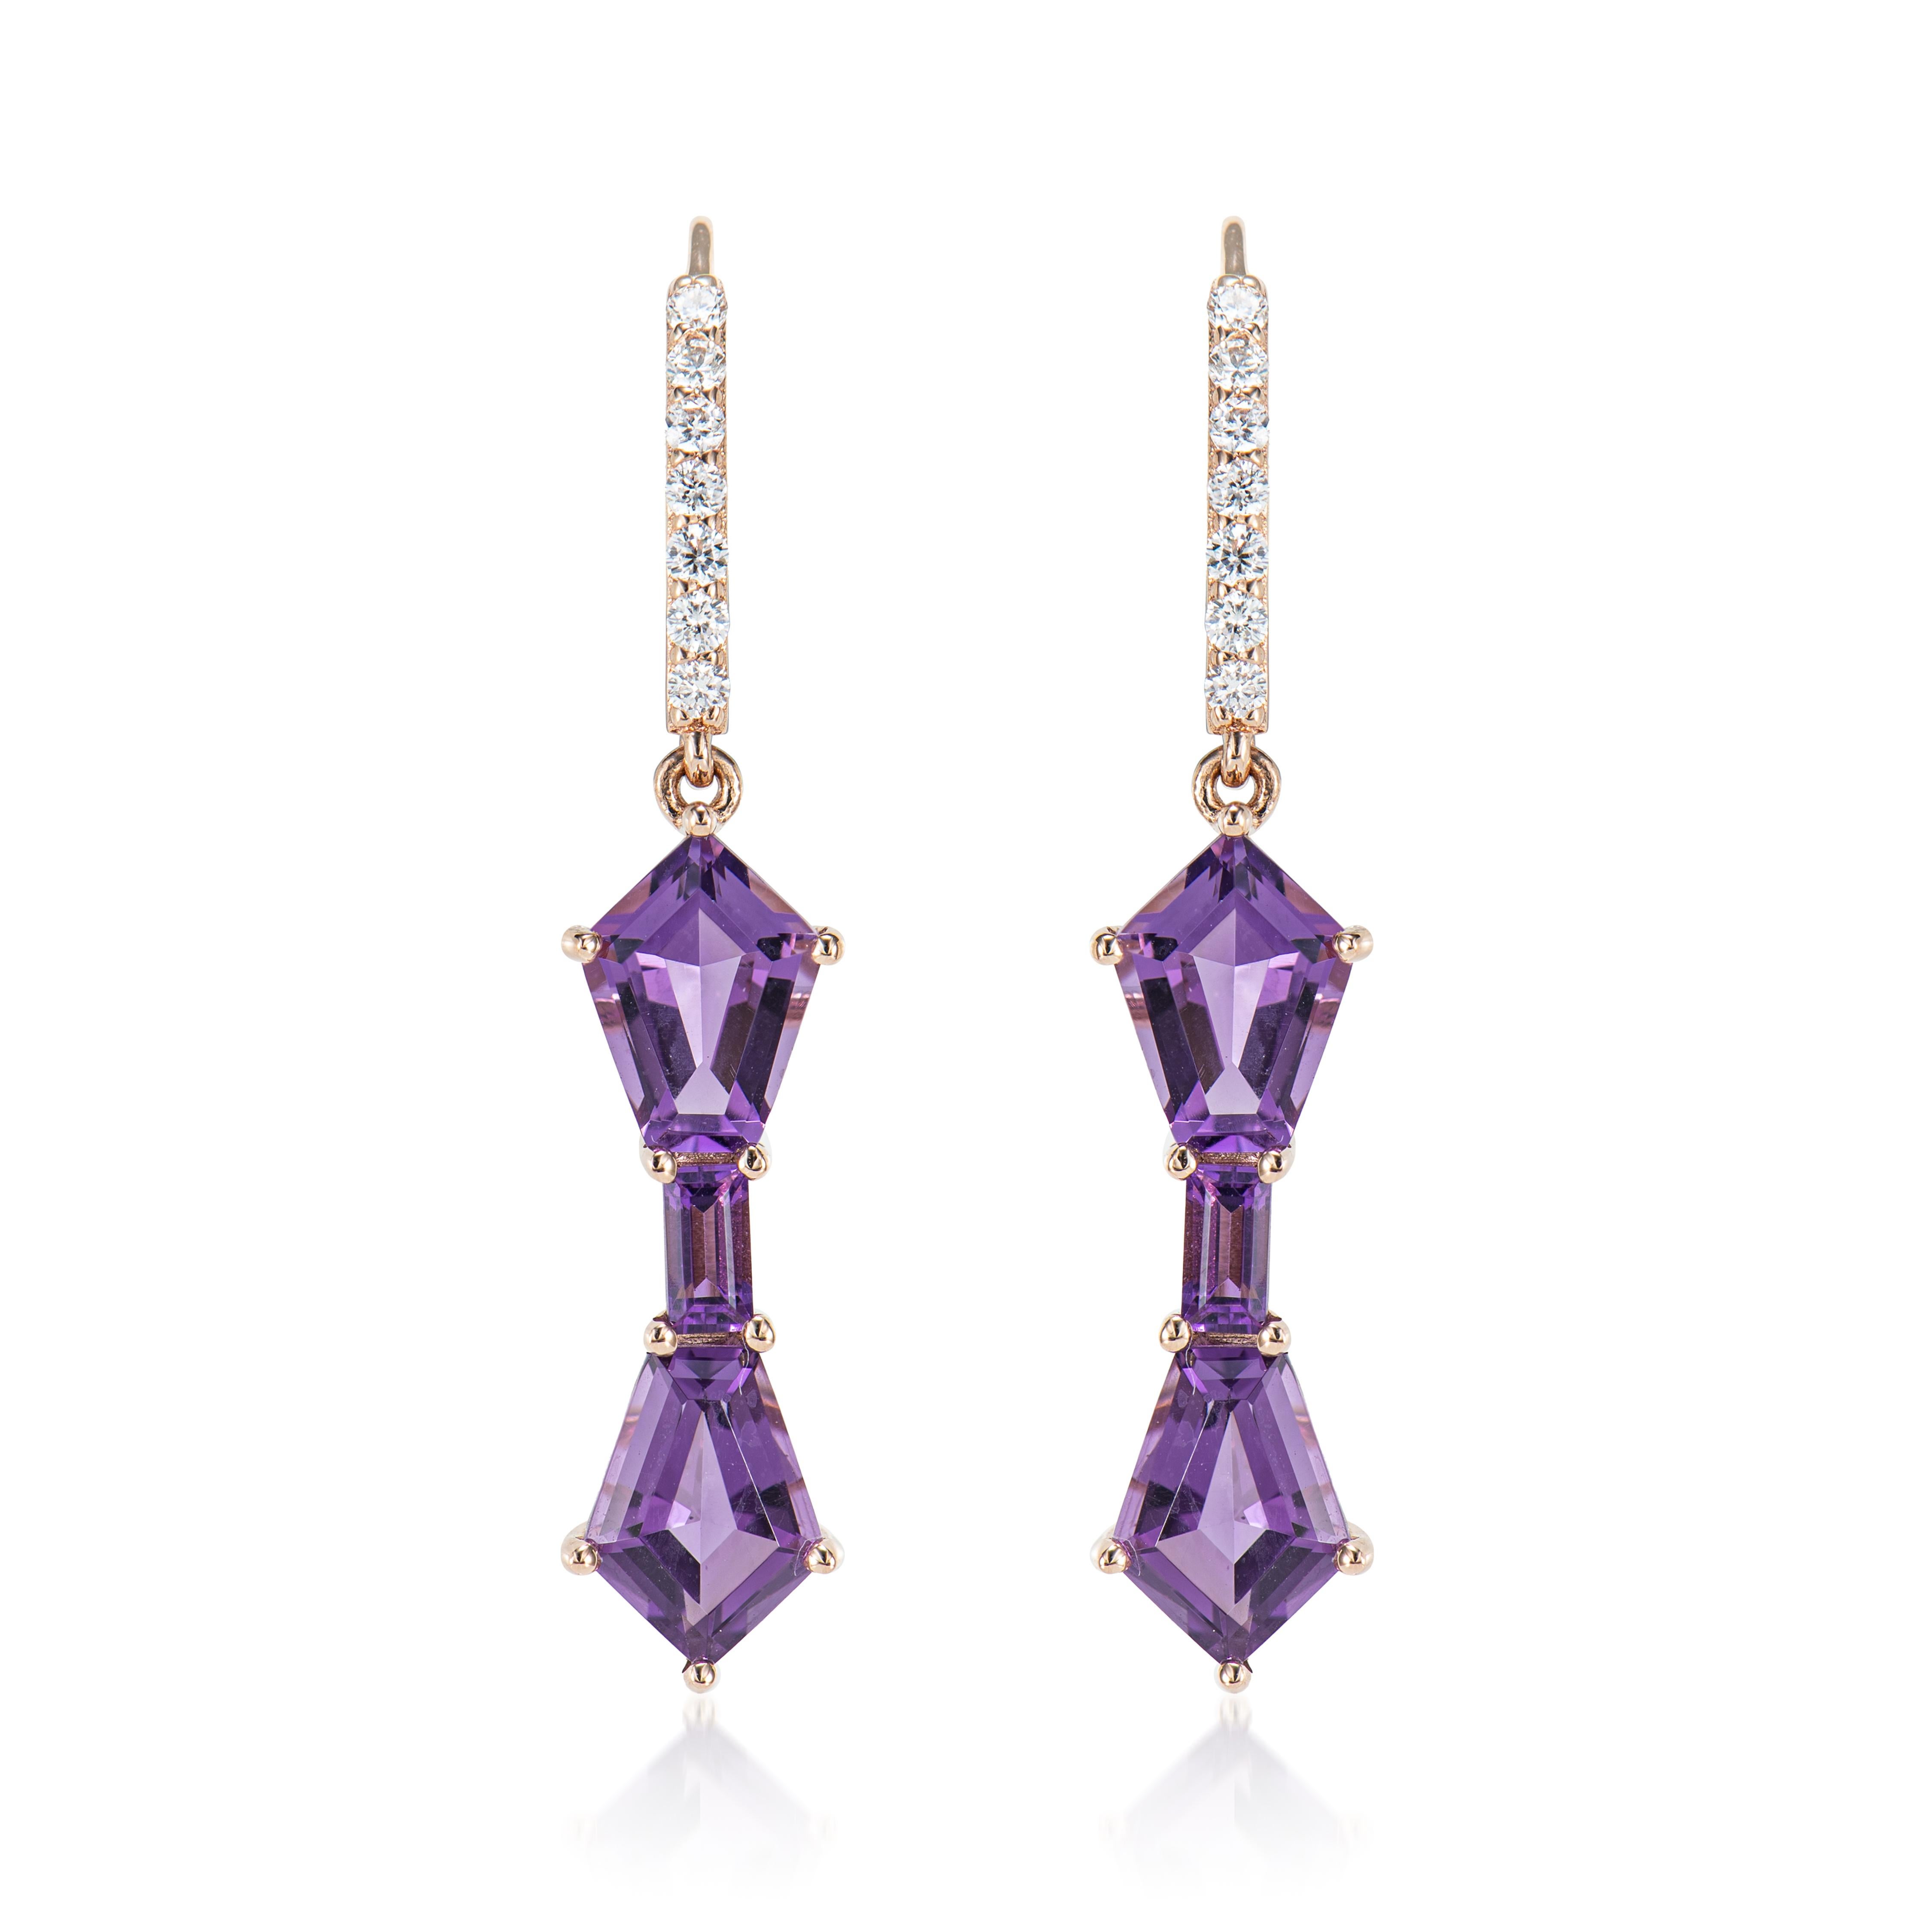 Contemporary 3.60 Carat Amethyst Drop Earrings in 14 Karat Rose Gold with White Diamond. For Sale